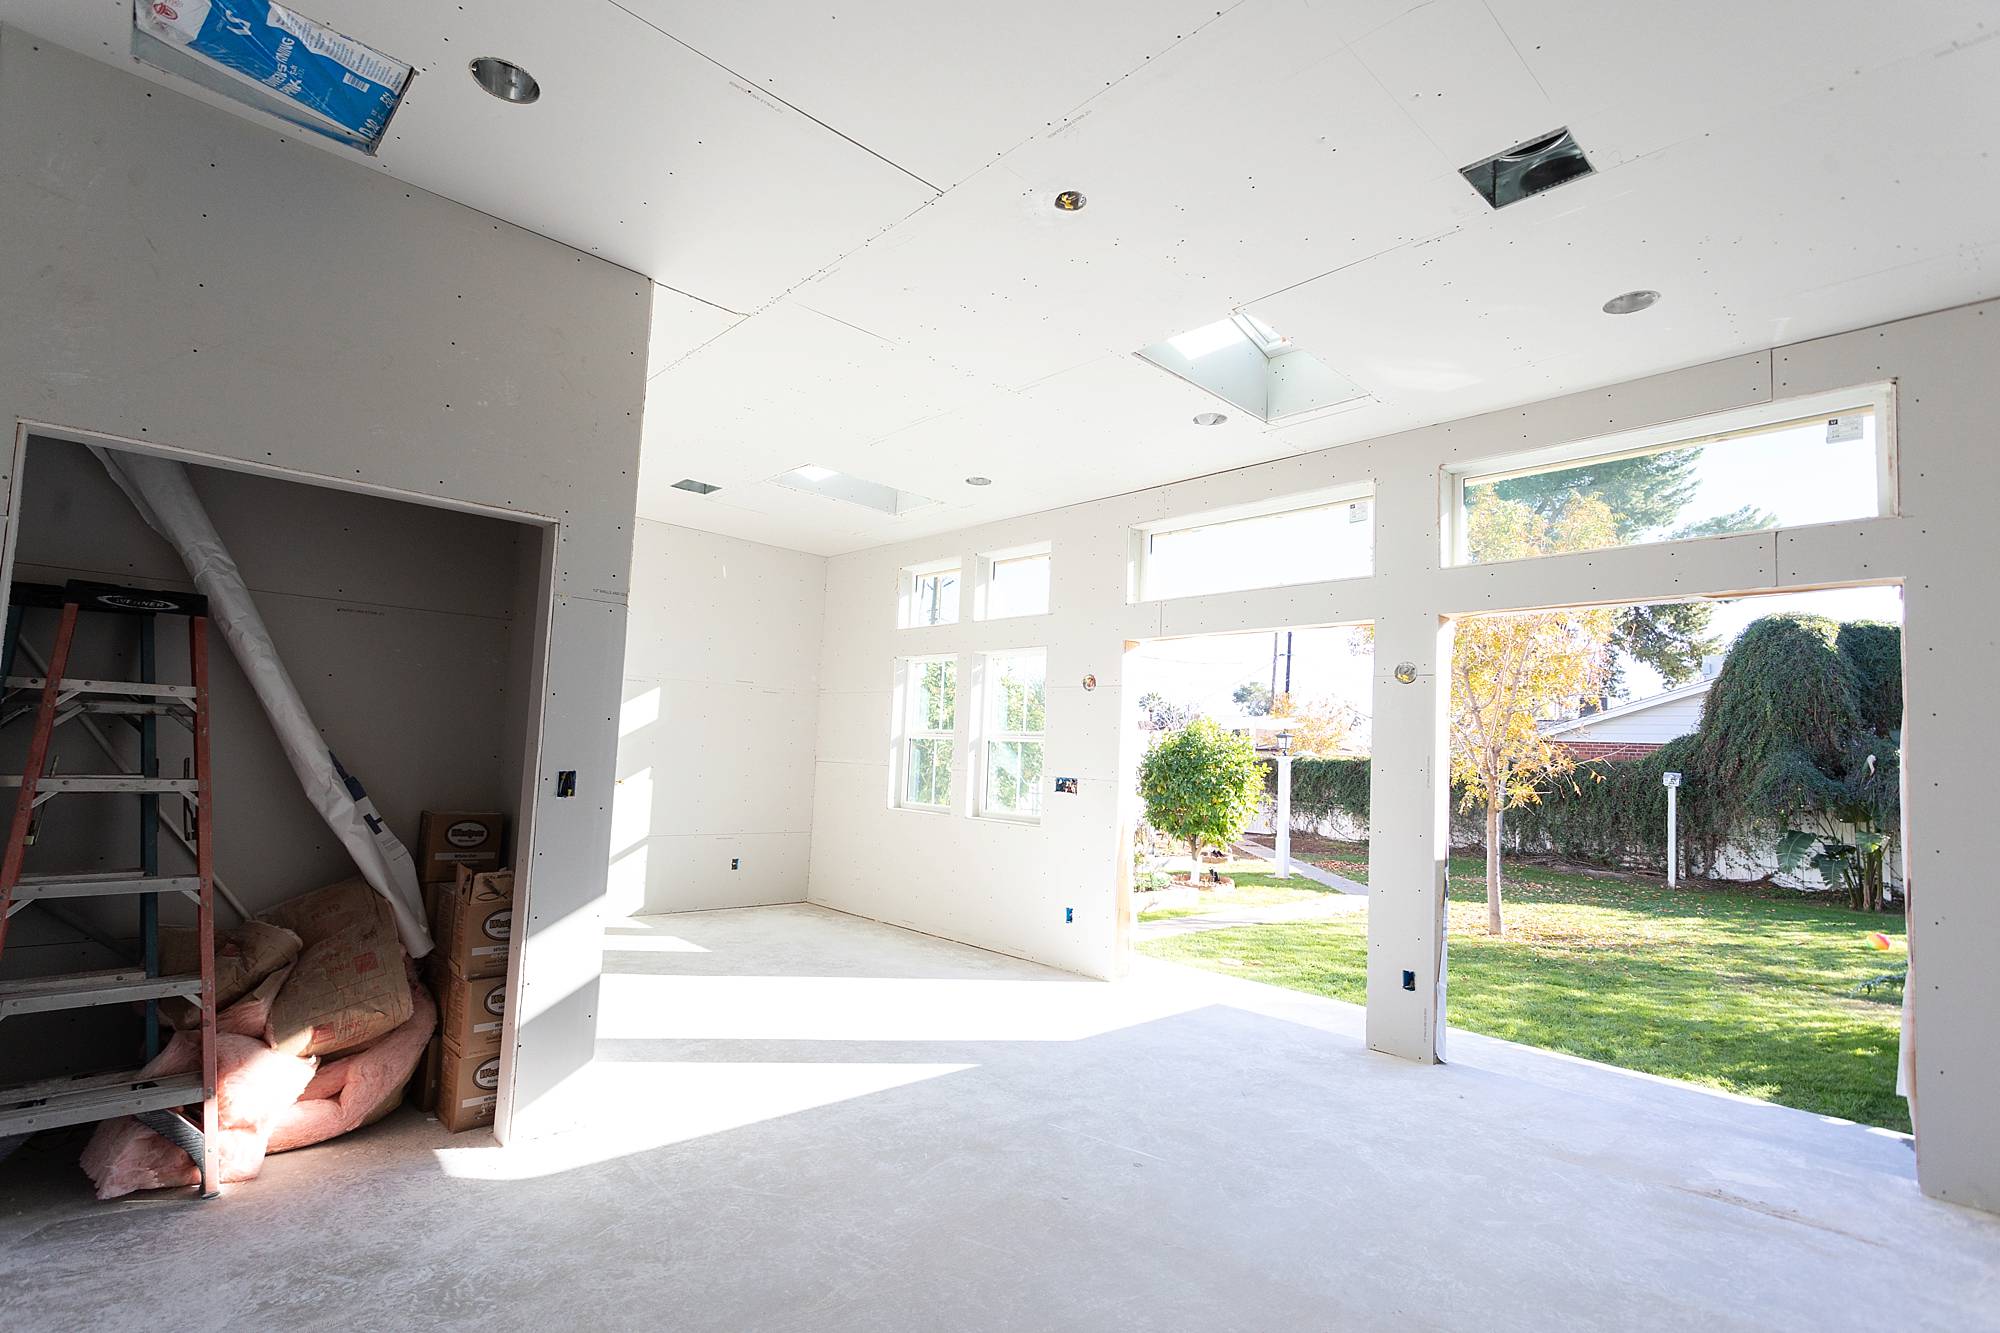 drywall up for Phoenix home expansion general contractor scottsdale arizona 